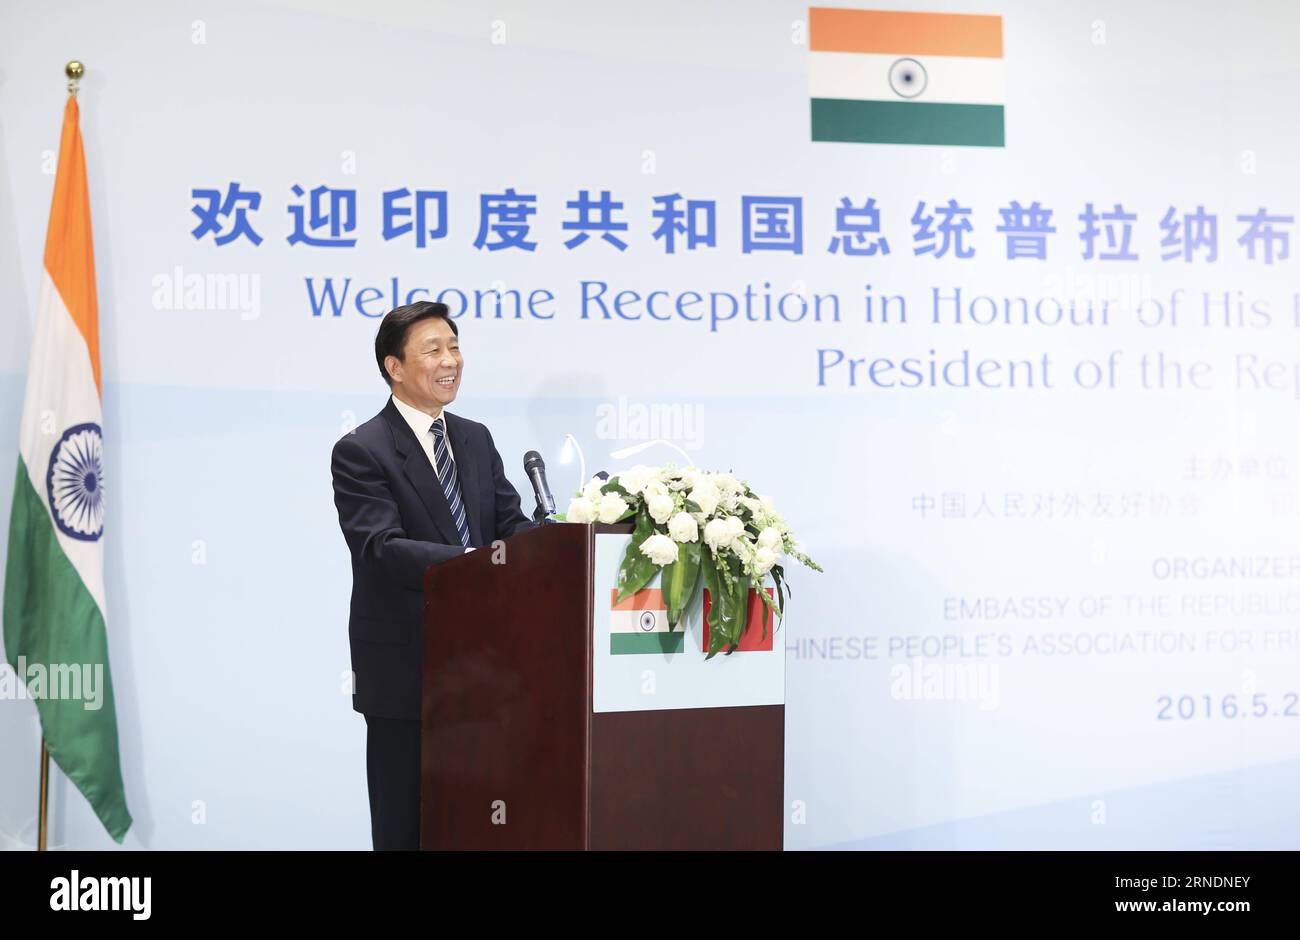 Chinese Vice President Li Yuanchao addresses a welcome reception for visiting Indian President Pranab Mukherjee in Beijing, capital of China, May 25, 2016. Invited by Chinese President Xi Jinping, Indian President Pranab Mukherjee is paying a state visit to China. ) (wyl) CHINA-BEIJING-LI YUANCHAO-INDIA-PRESIDENT-RECEPTION (CN) DingxLin PUBLICATIONxNOTxINxCHN   Chinese Vice President left Yuan Chao addresses a Welcome Reception for Visiting Indian President Pranab Mukherjee in Beijing Capital of China May 25 2016 invited by Chinese President Xi Jinping Indian President Pranab Mukherjee IS payi Stock Photo